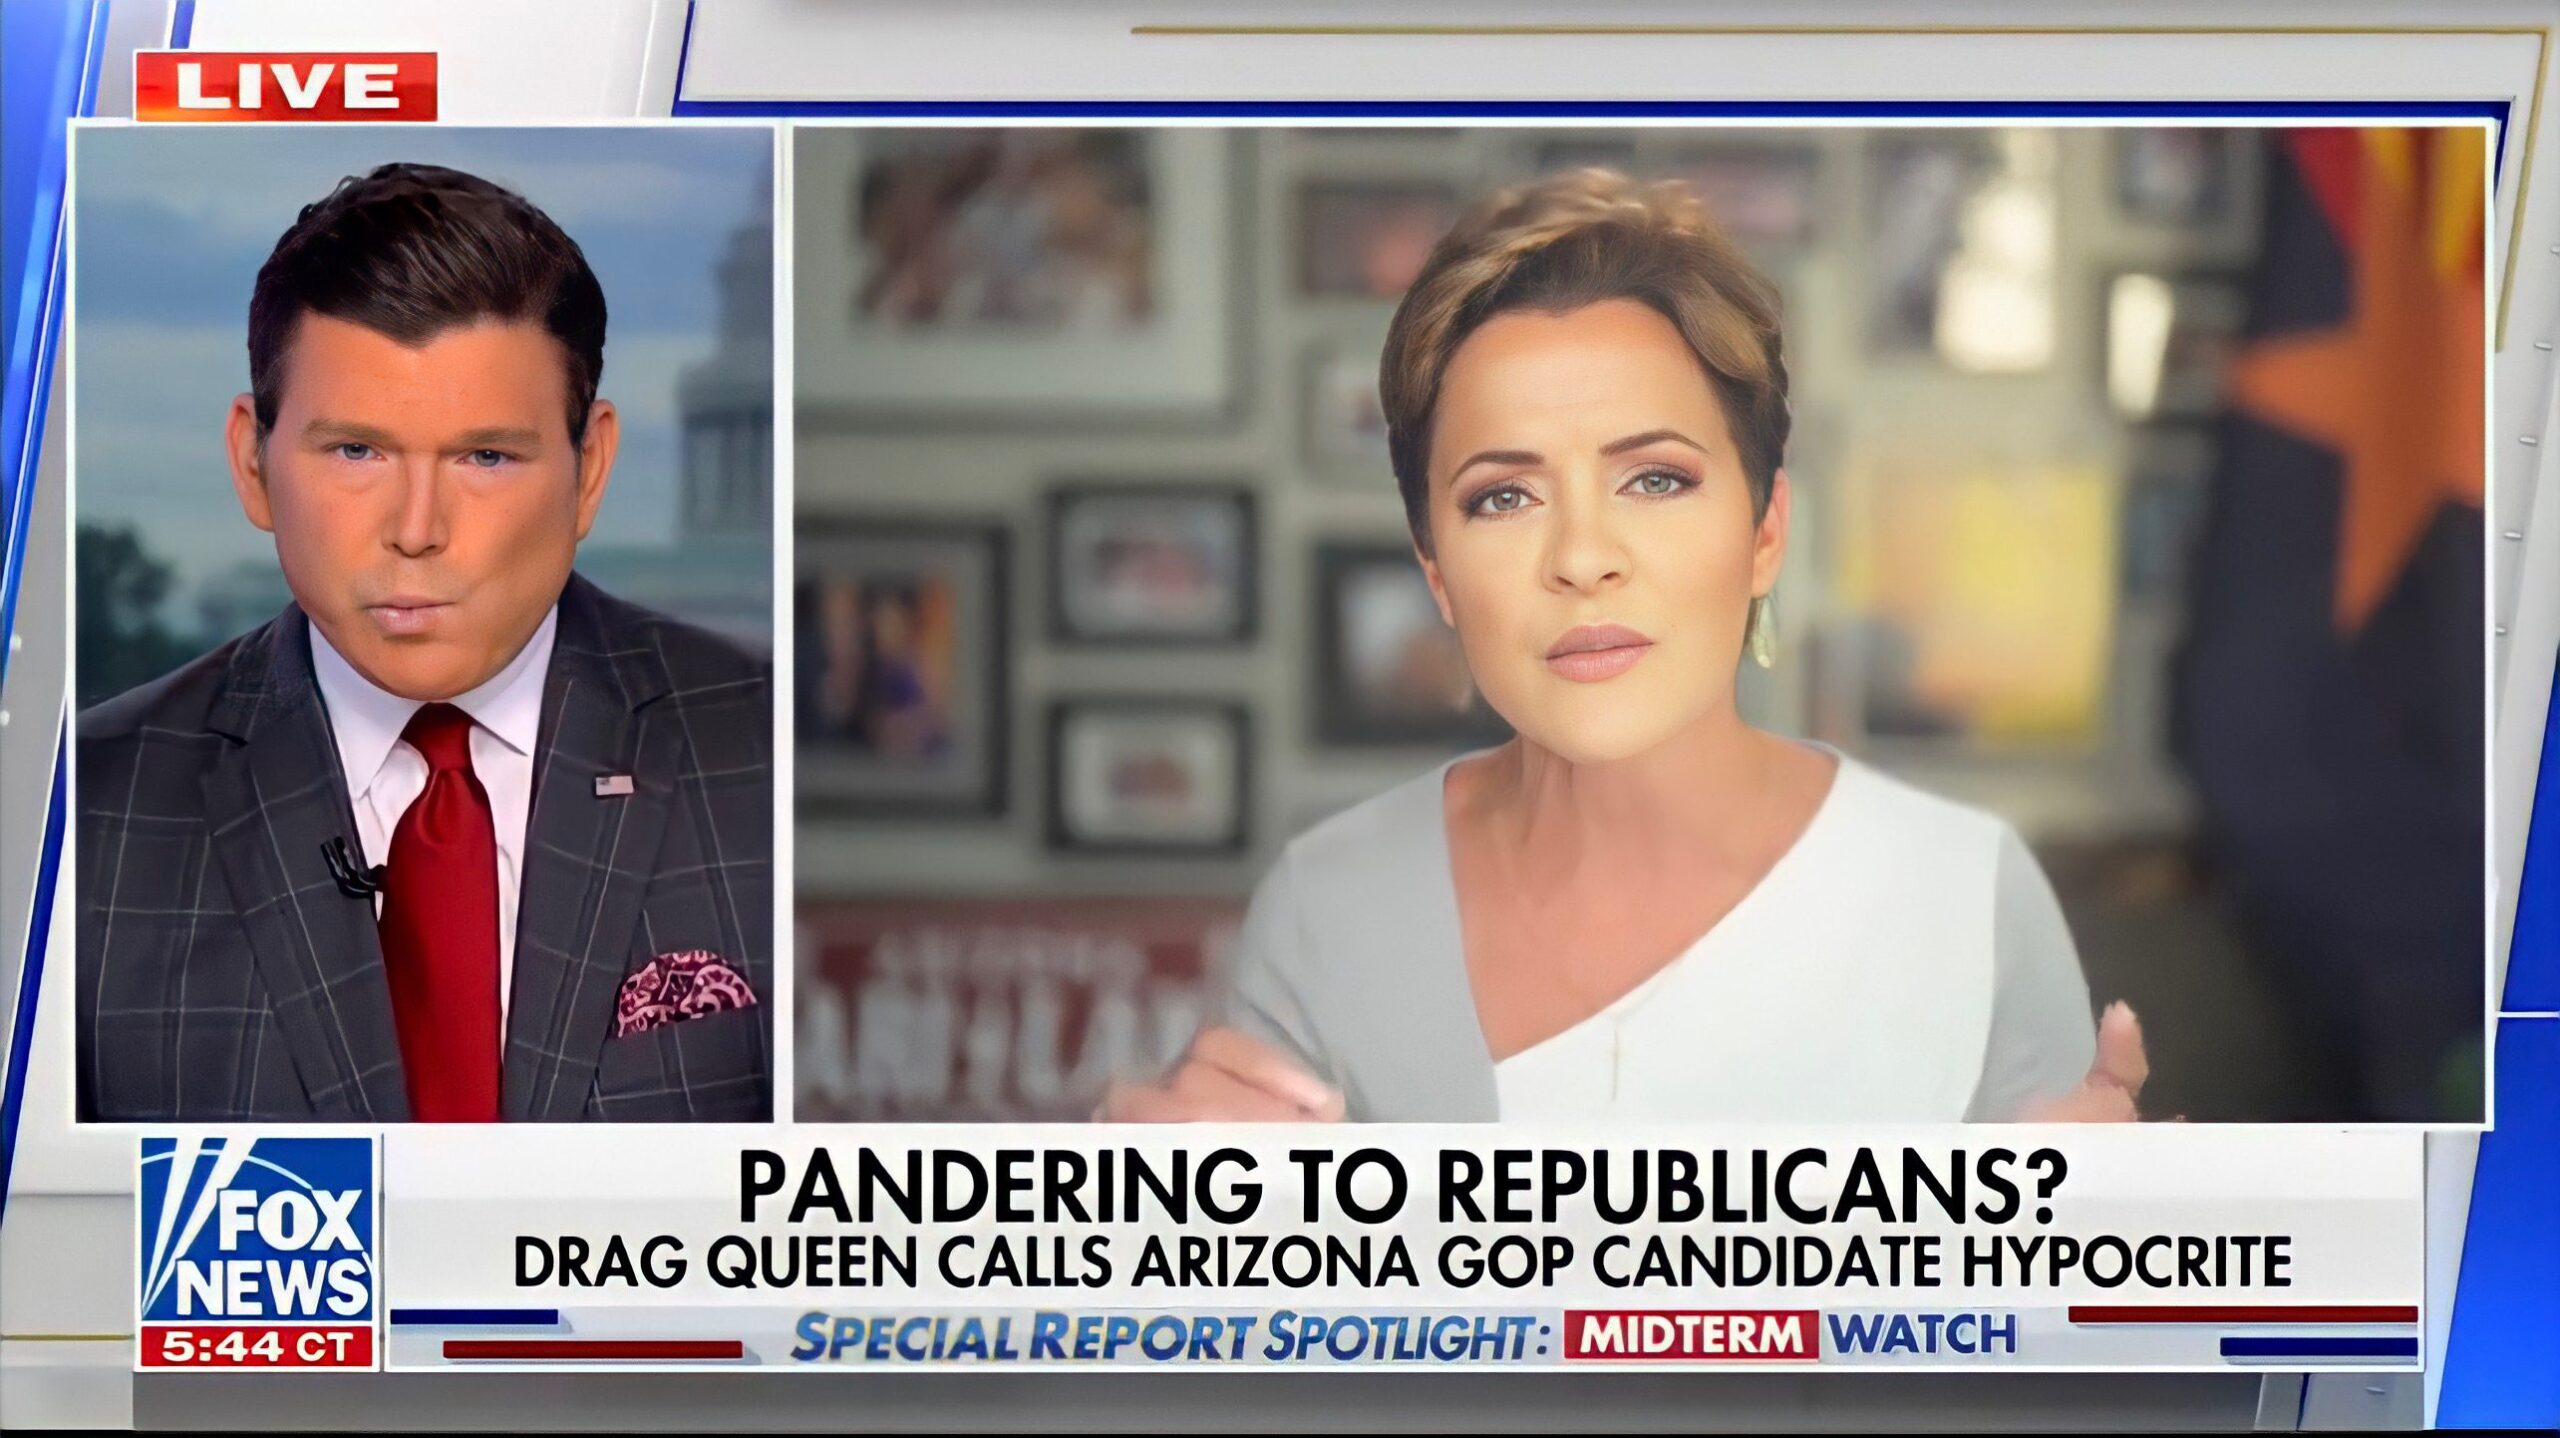 “I Am Really Disappointed in FOX, I Thought You Were Better Than CNN!” – BOOM! Kari Lake INCINERATES Bret Baier and FOX News for Pushing FAKE STORY on AZ Drag Queen (VIDEO)